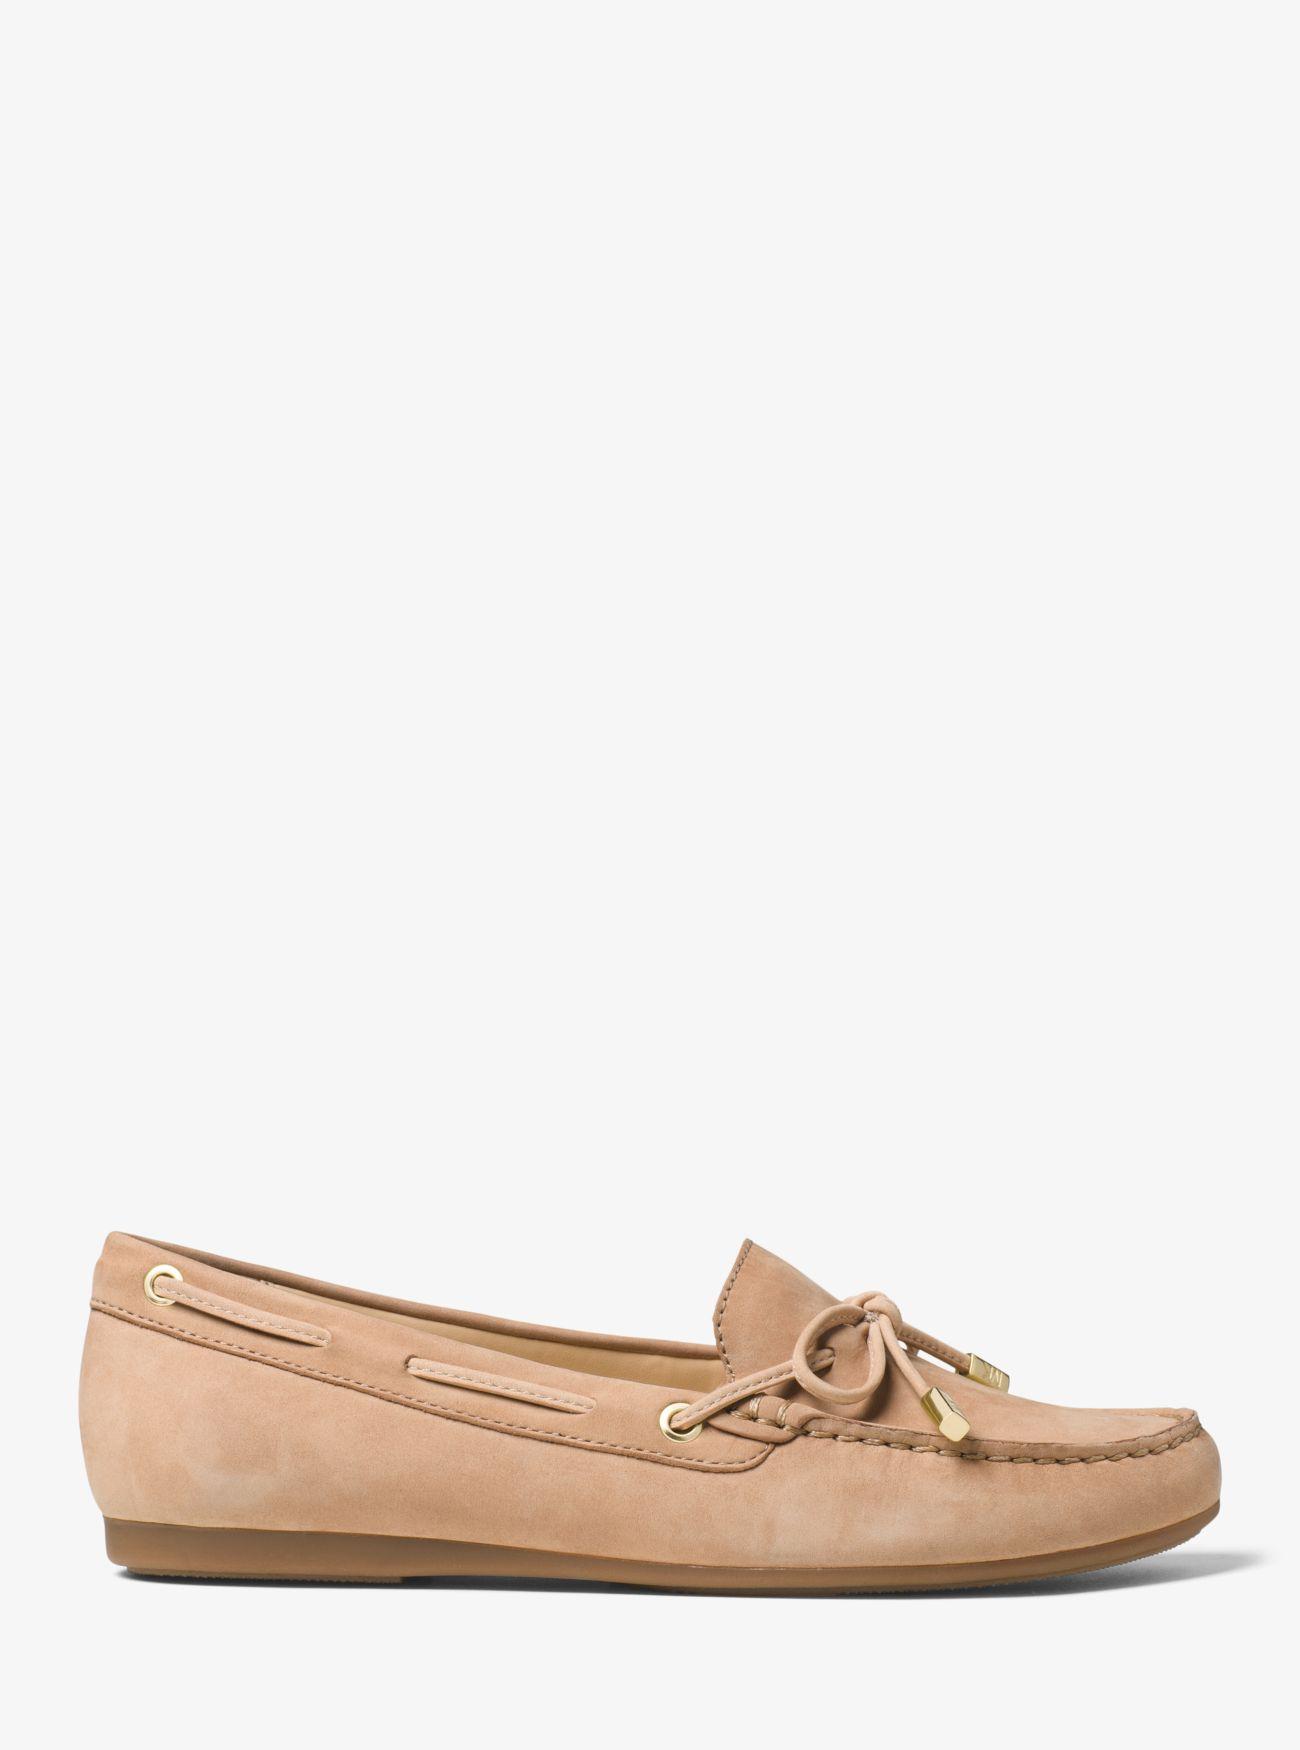 Michael Kors Sutton Leather Moccasin | Lyst